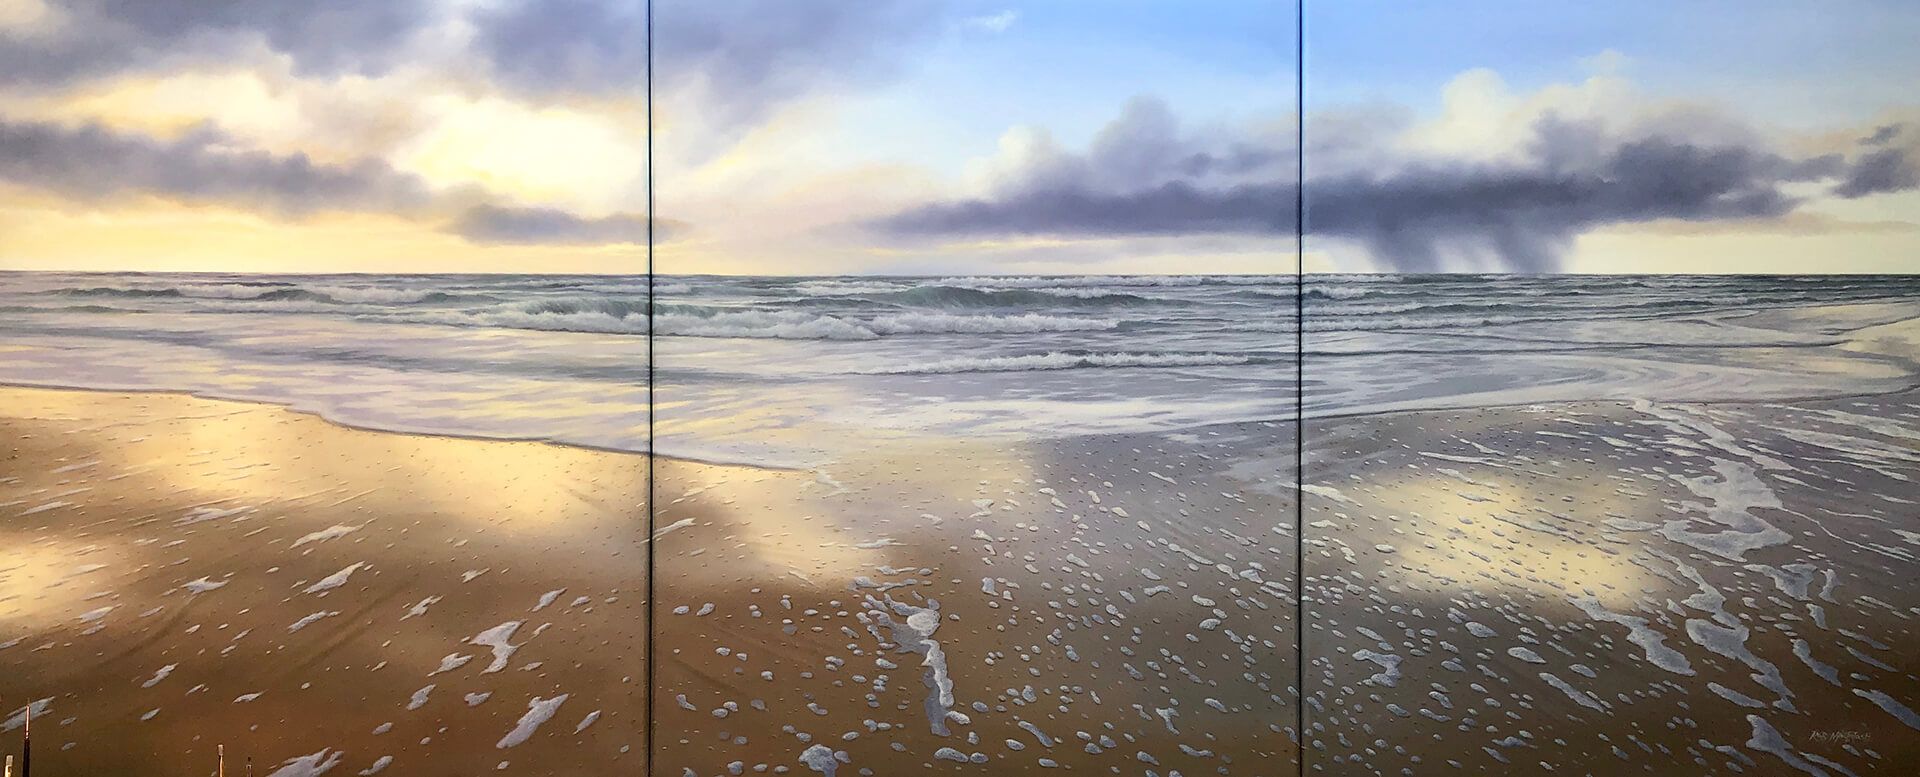 Photorealistic painting of a dawn over a calming beach